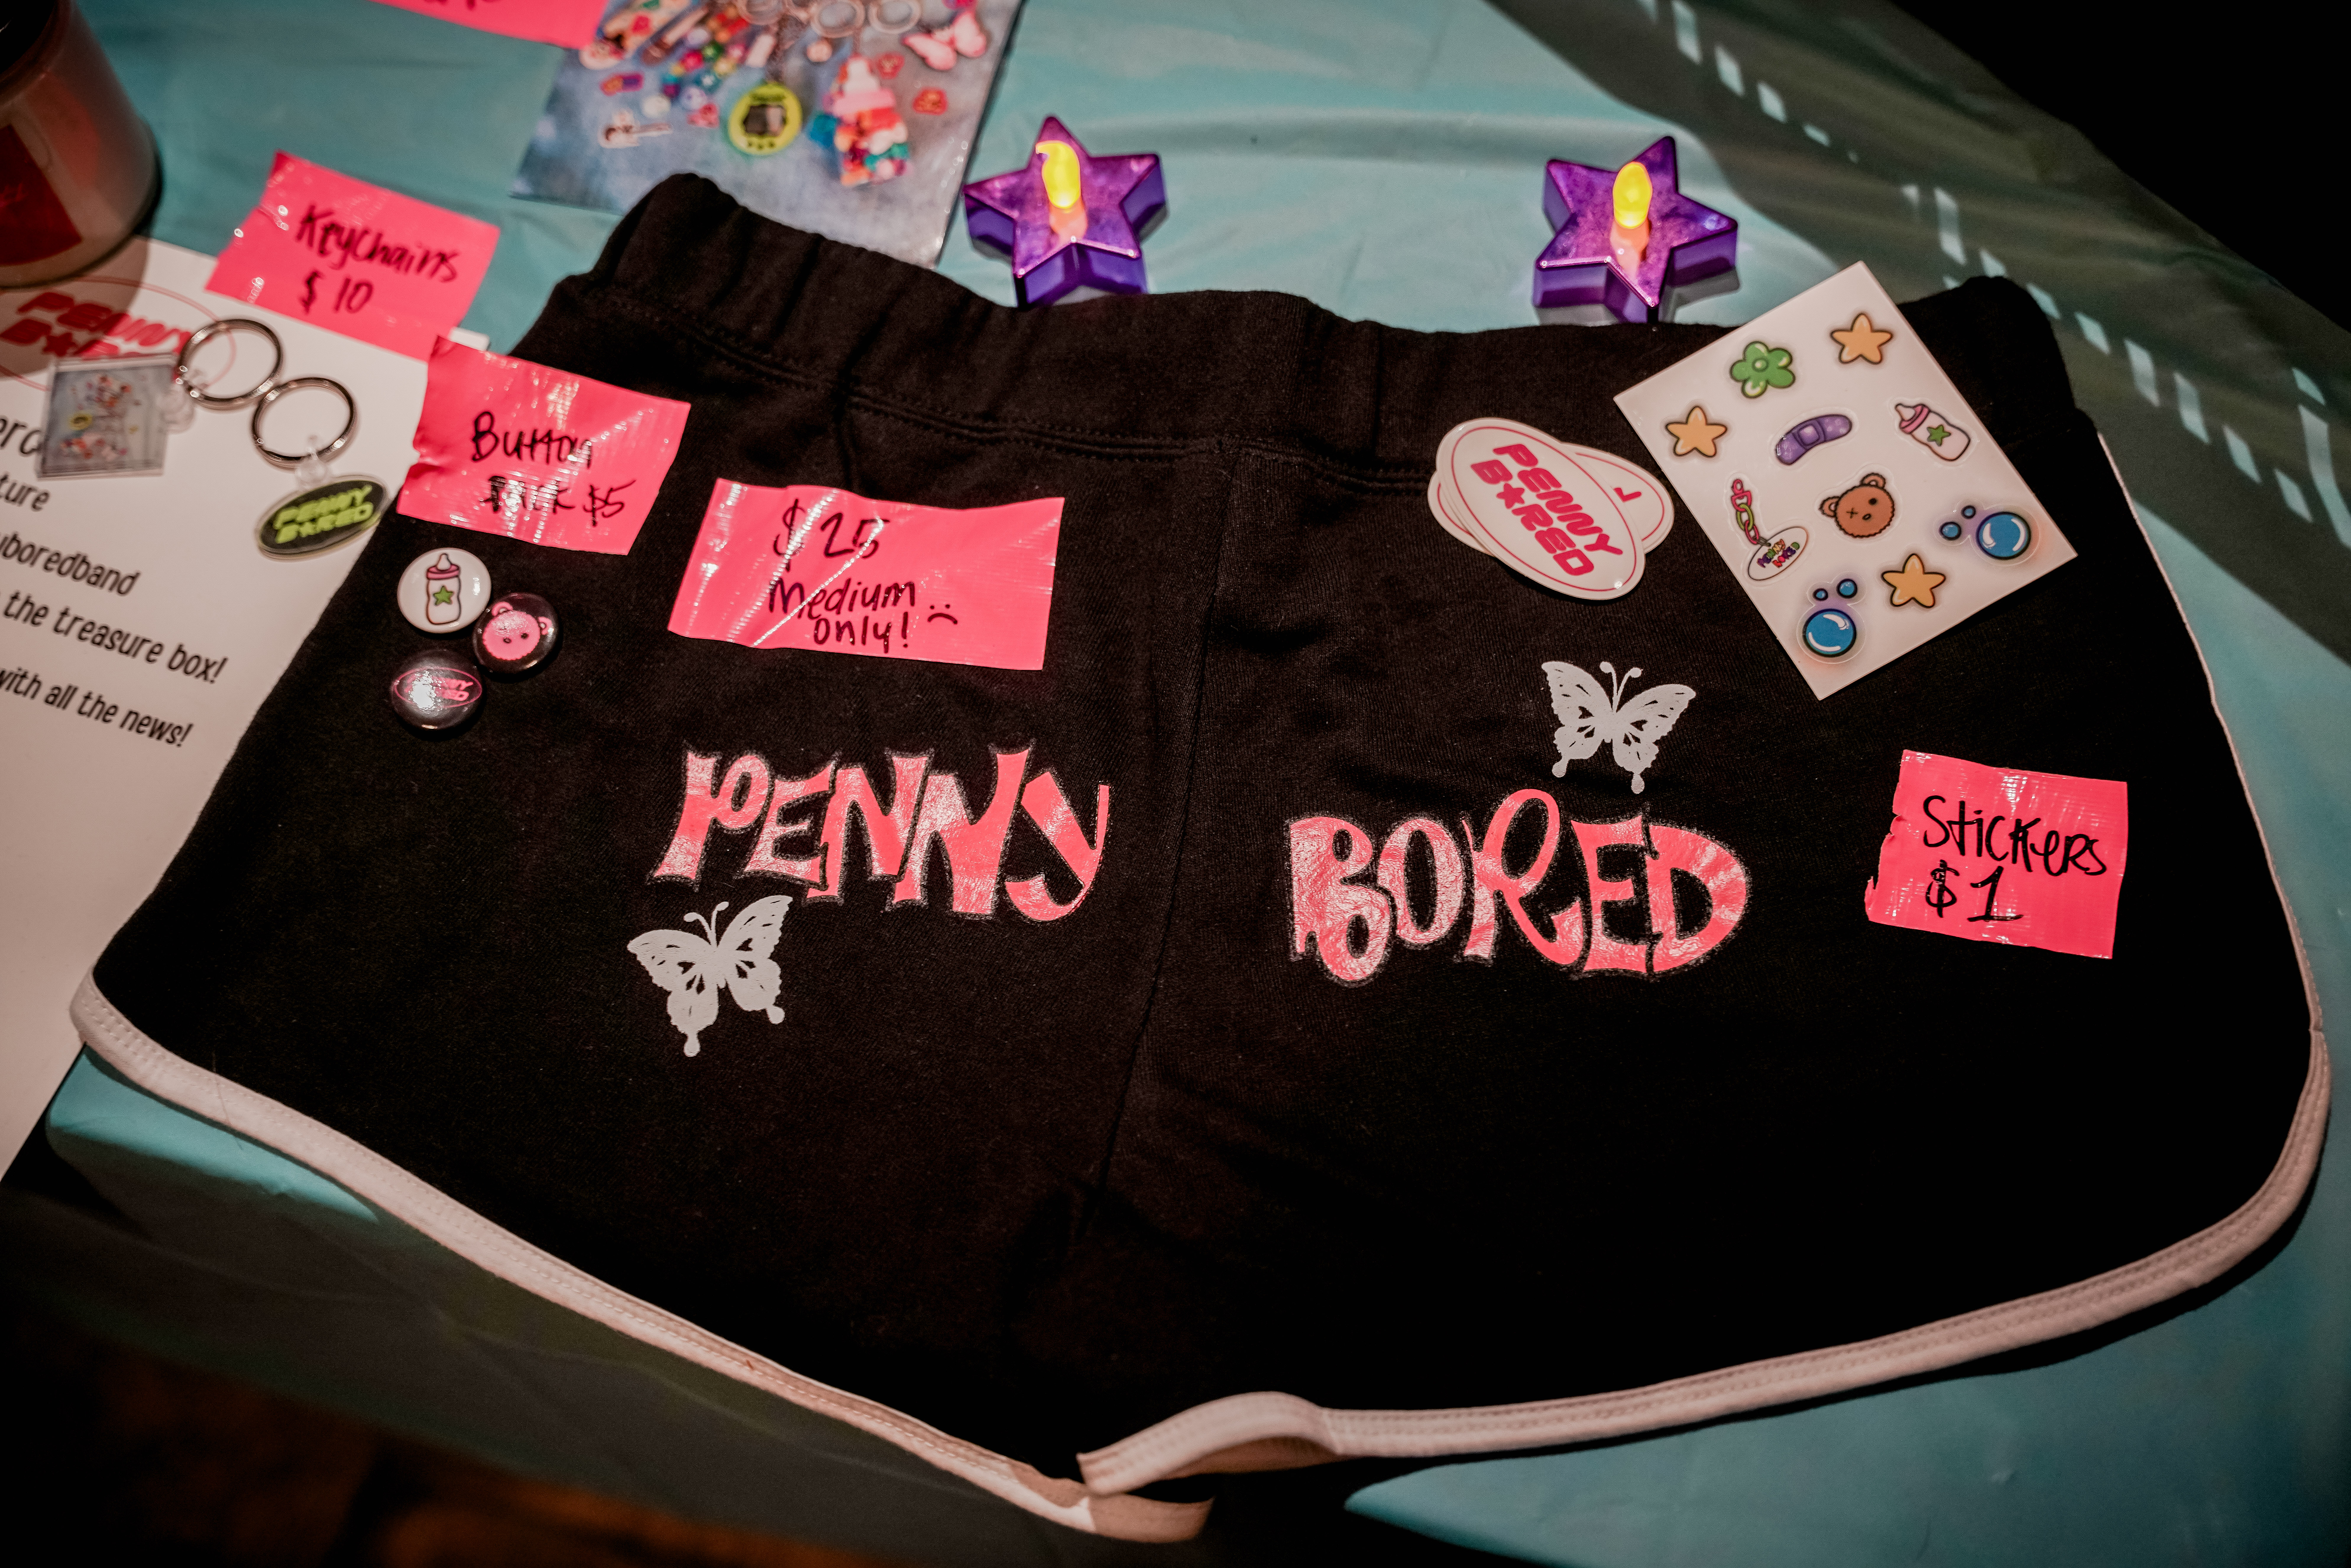 A merch table with stickers and shorts